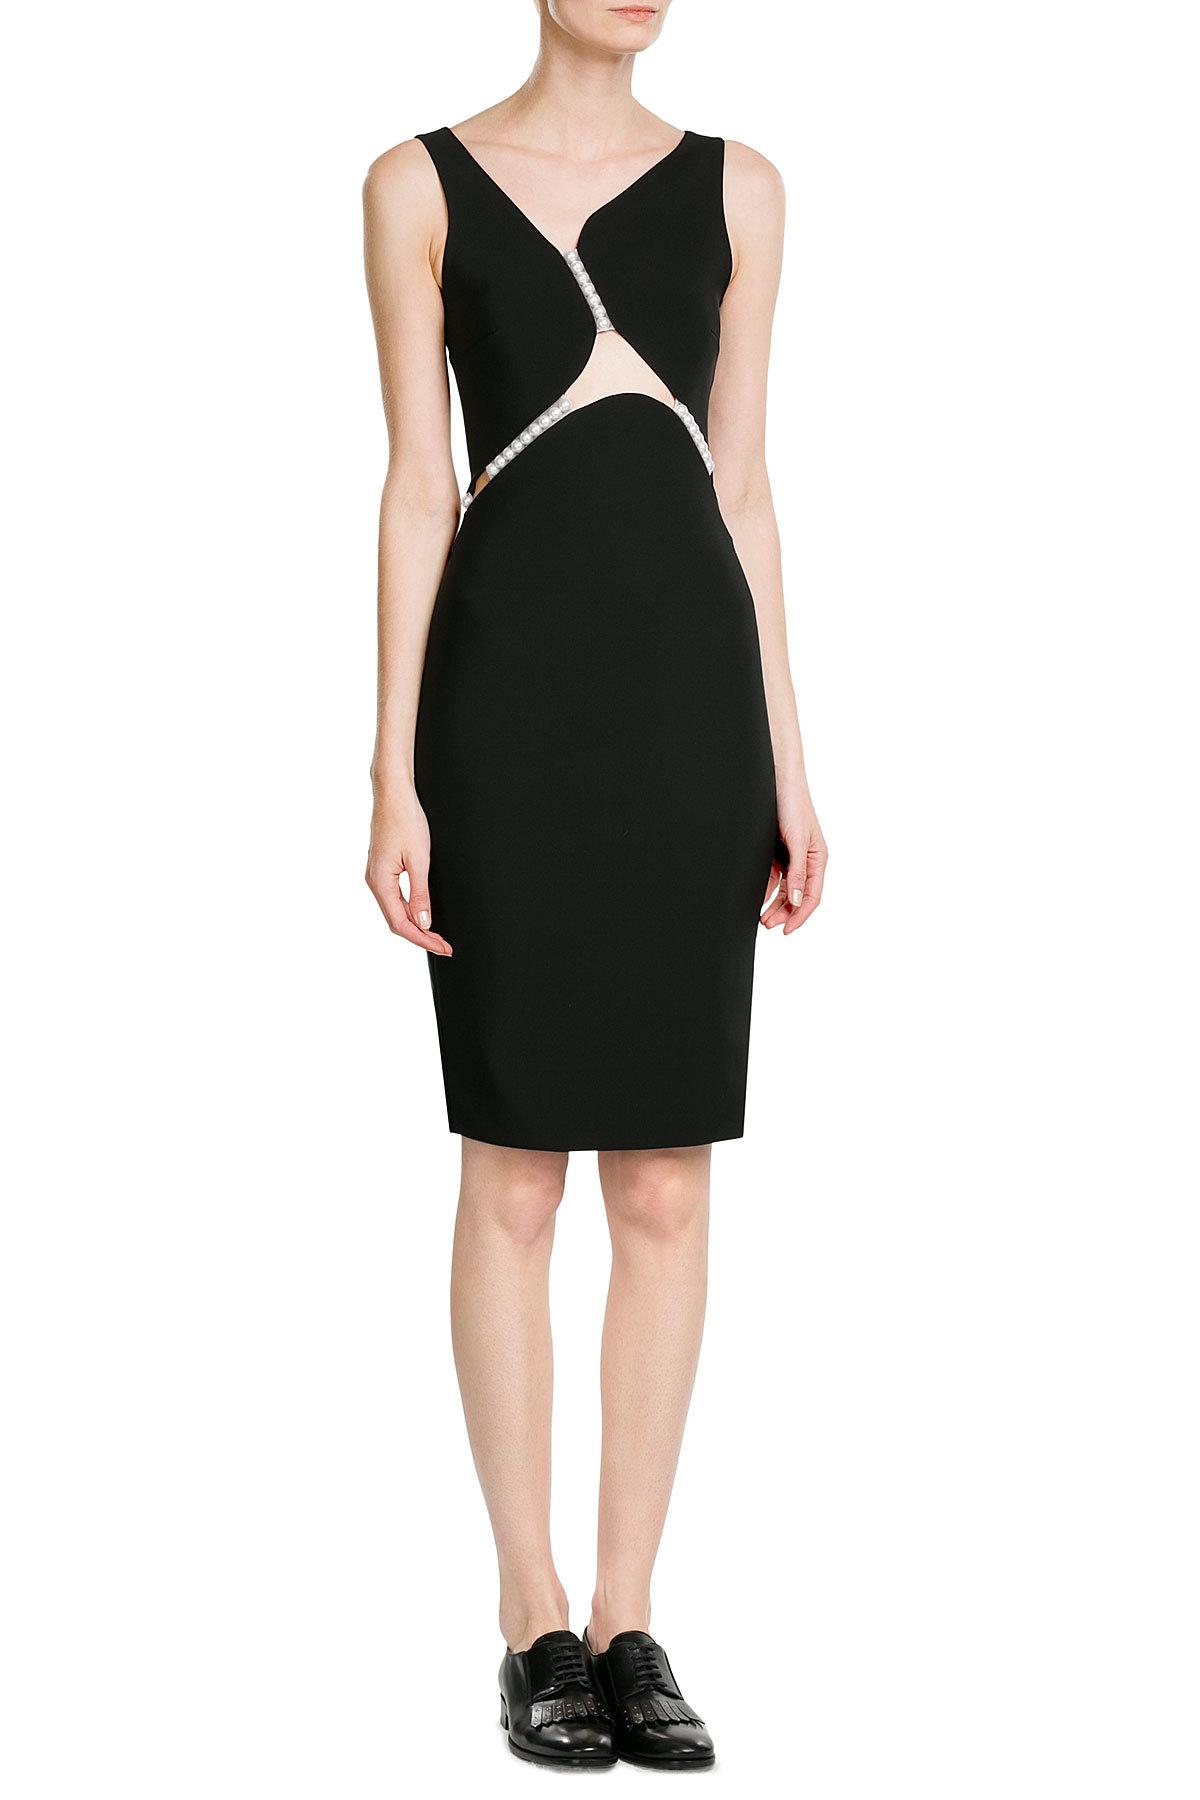 Lyst - Mugler Dress With Sheer Inserts And Faux Pearls in Black